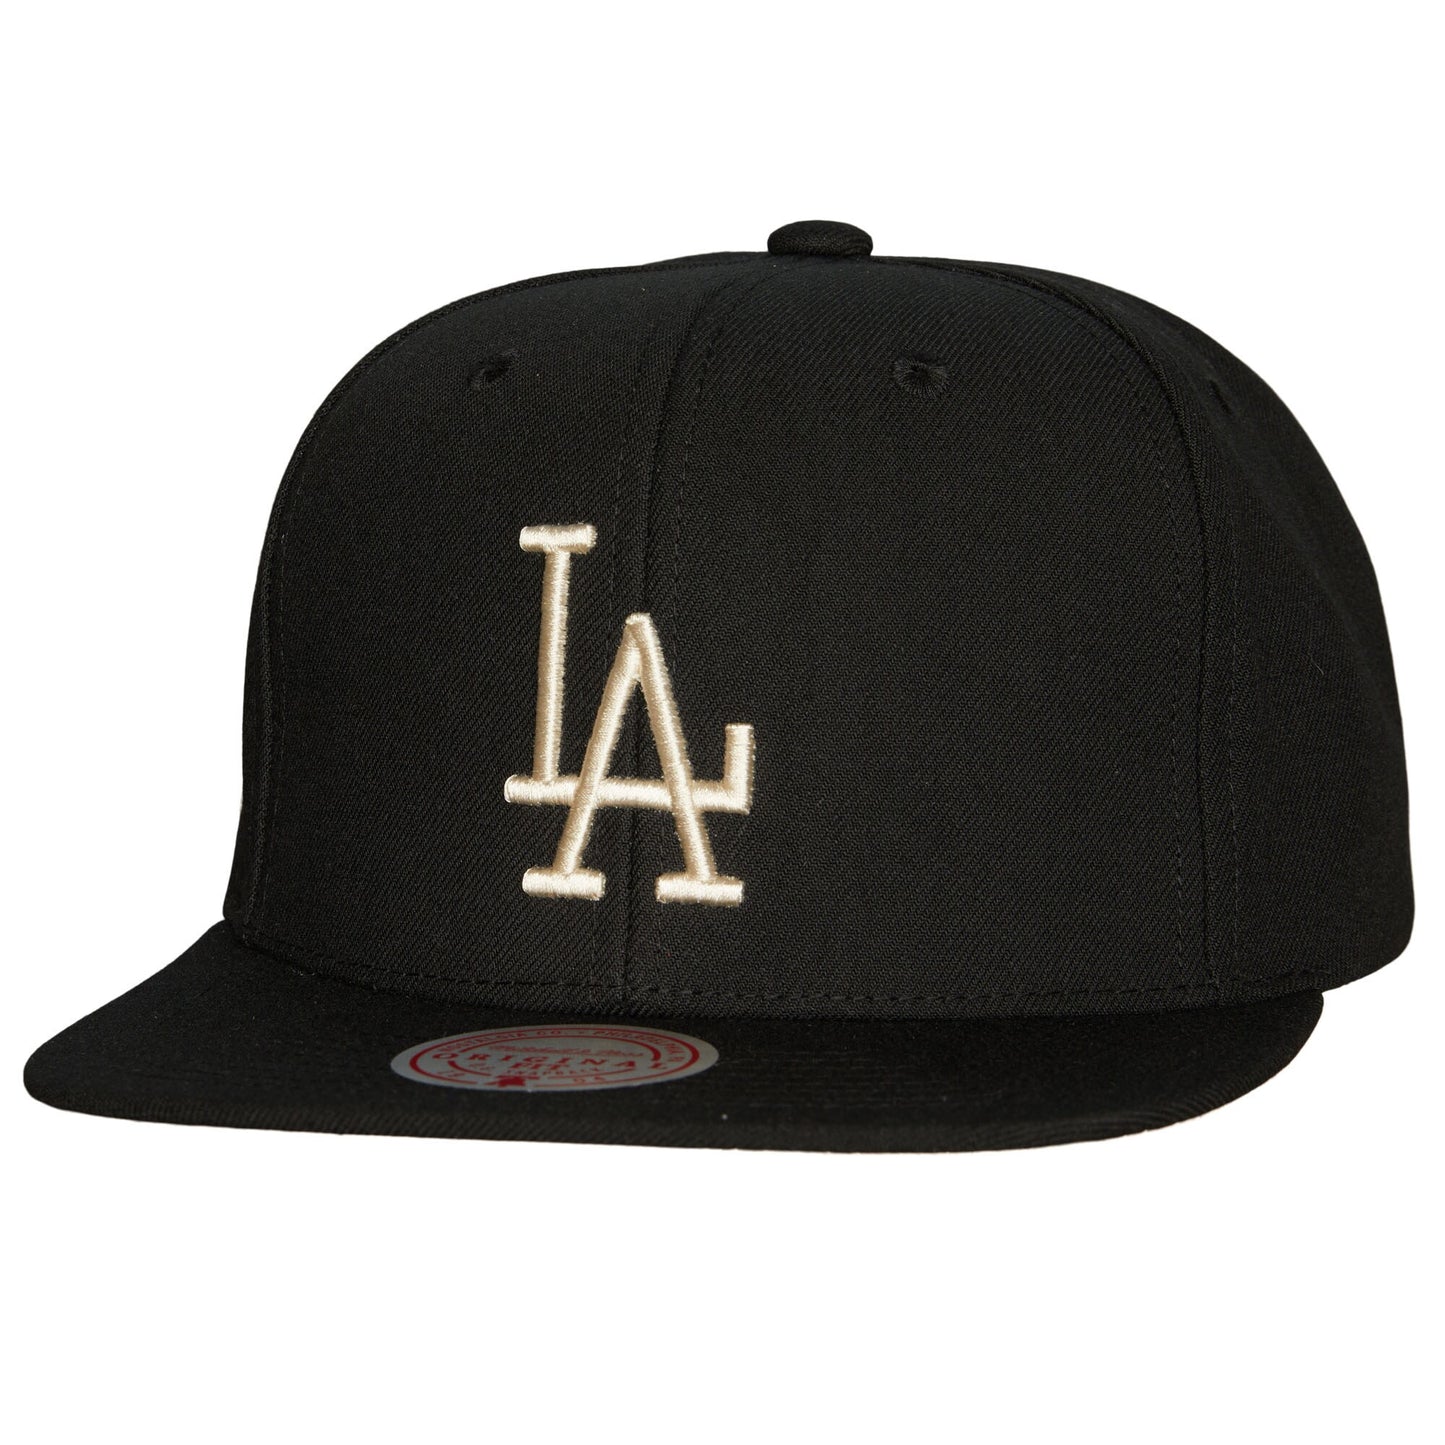 Los Angeles Dodgers Mitchell & Ness Cooperstown Collection True Classics Snapback Hat - Black